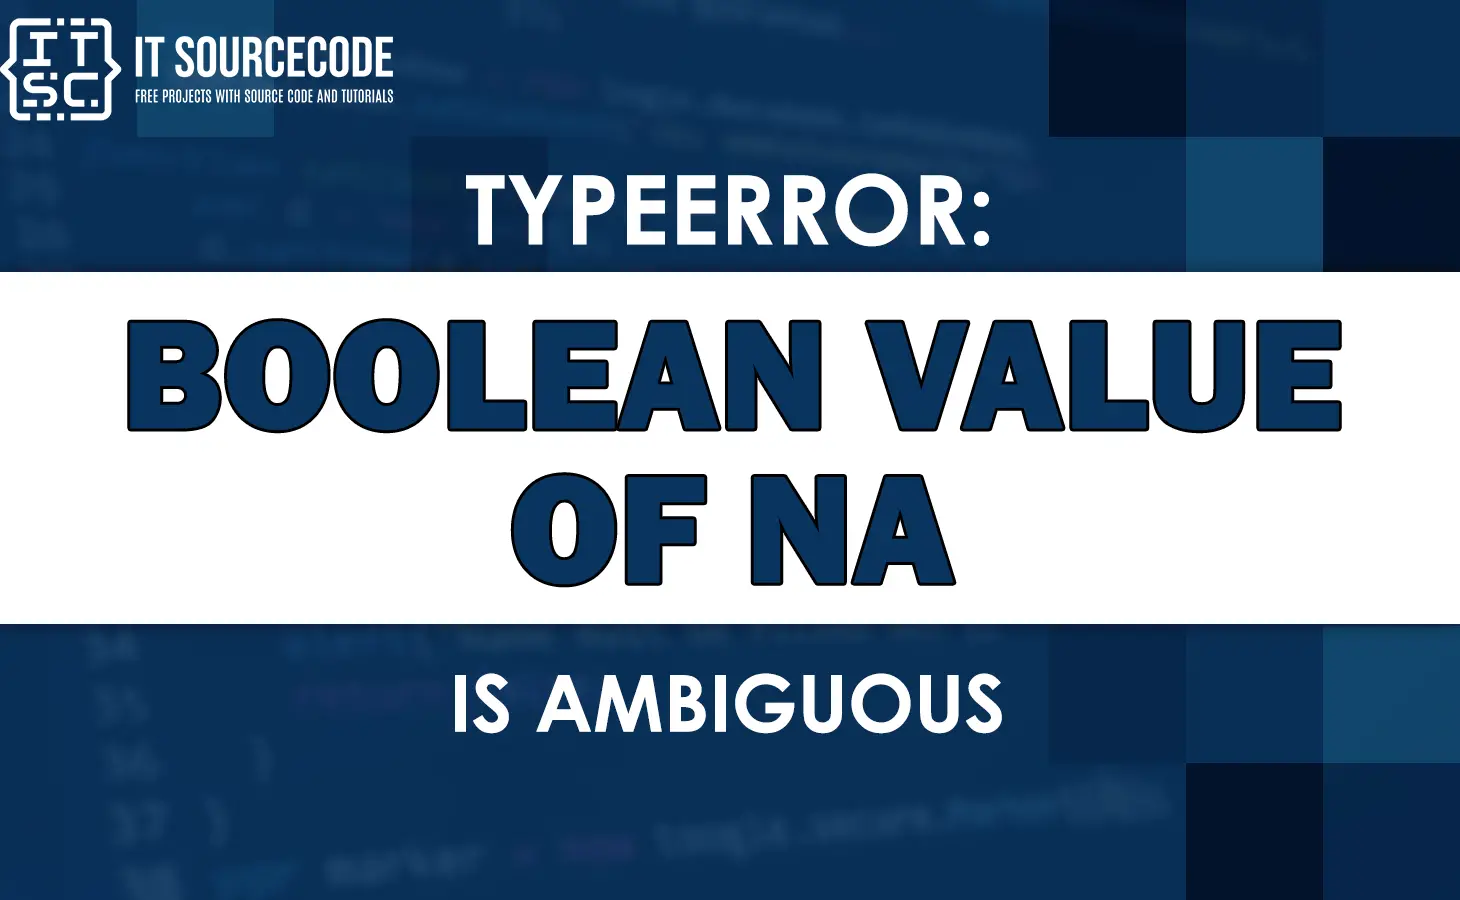 Typeerror: boolean value of na is ambiguous [SOLVED]